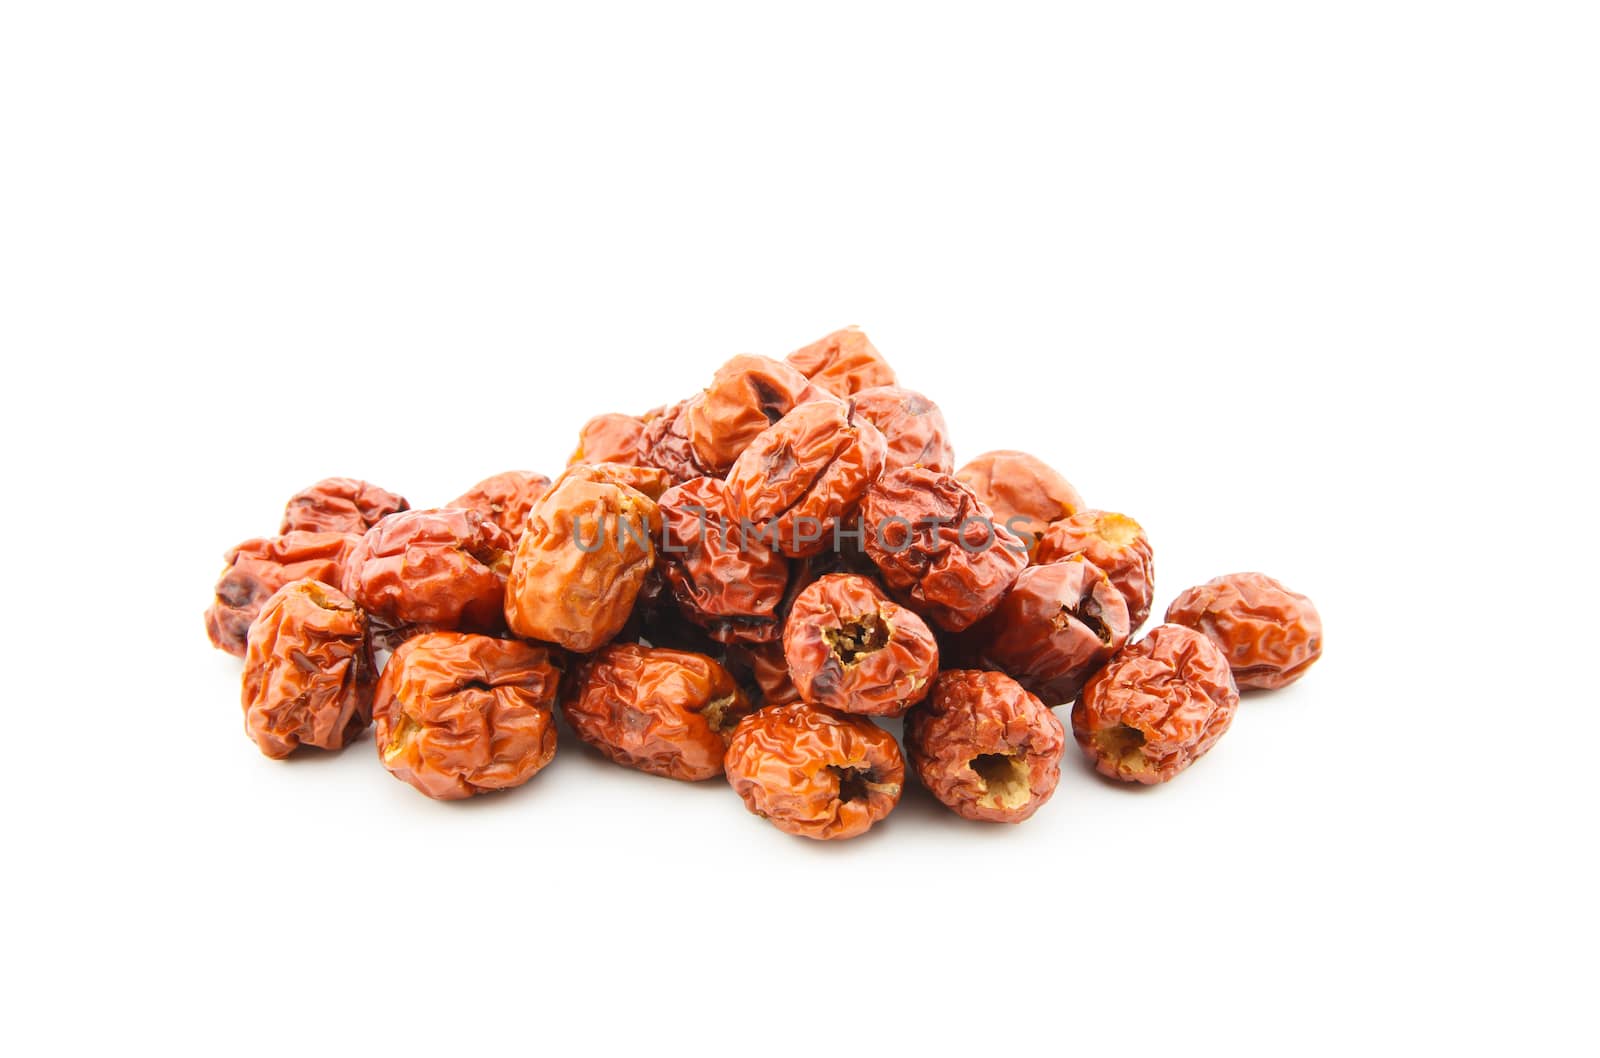 dried jujube fruits on white background by vitawin